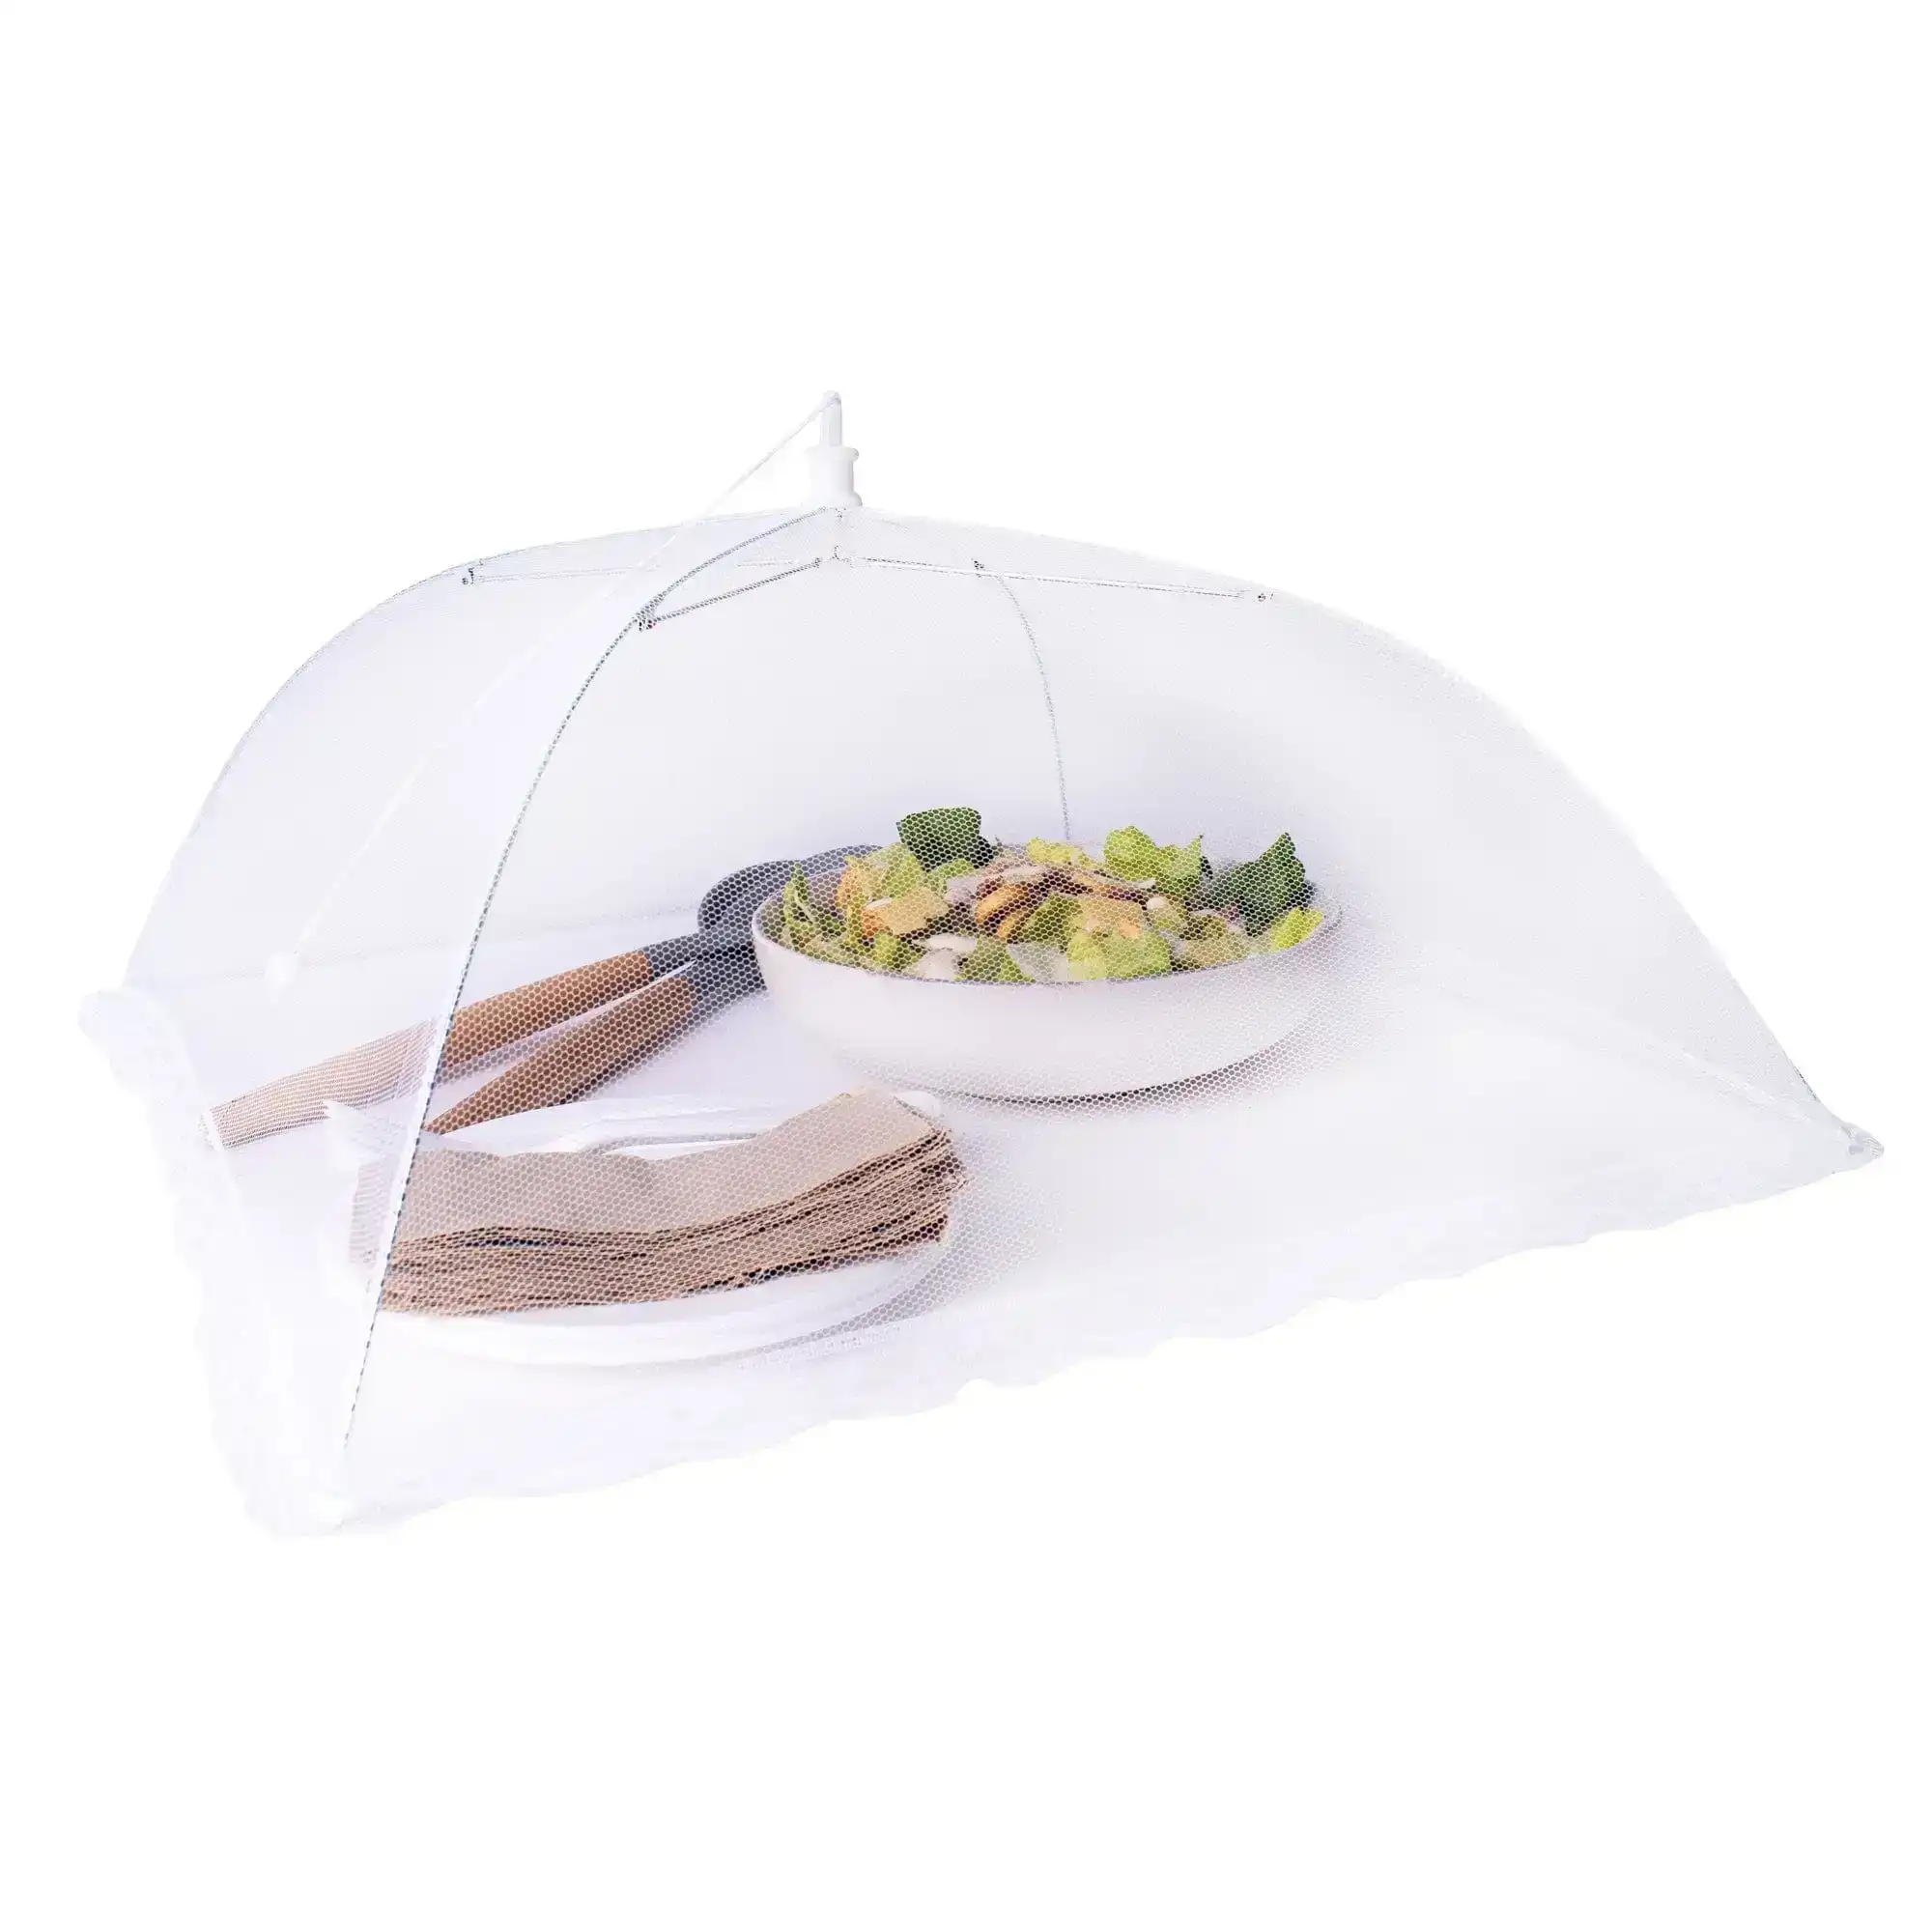 37cm Square Net Food Cover